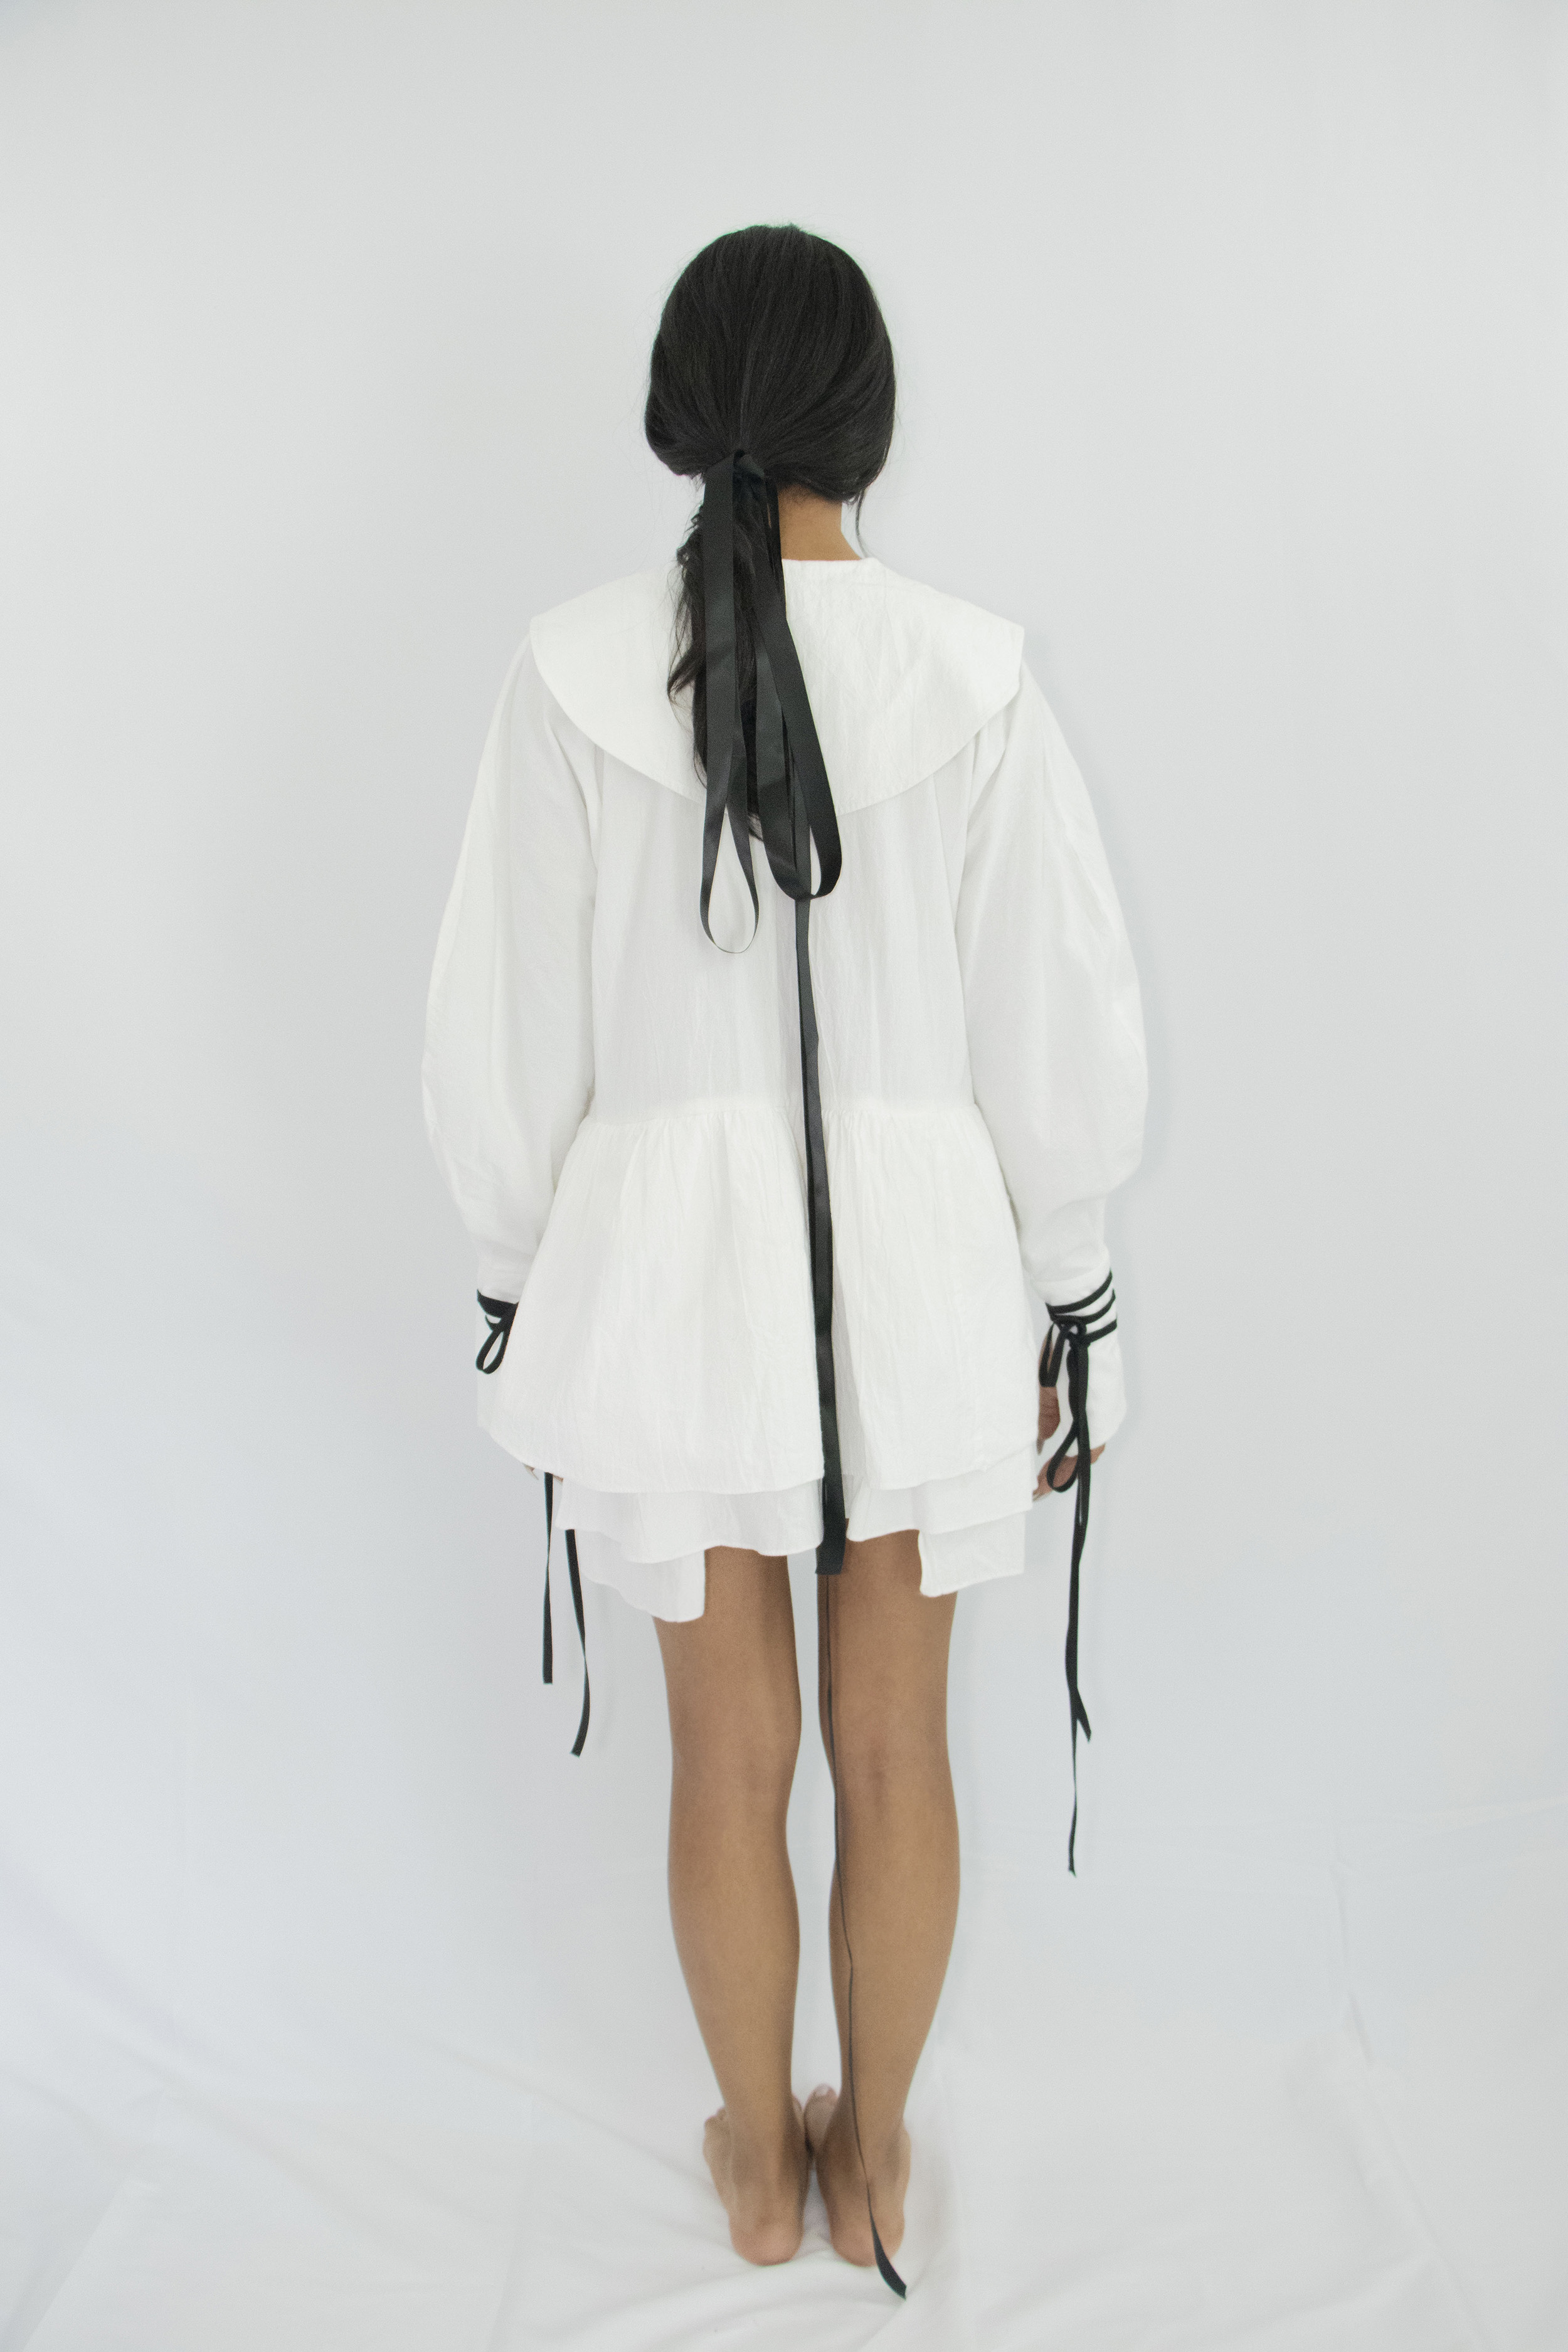 Woman wearing white organic cotton short dress with kimono sleeves, large cuffs with attachable contrasting black straps, pilgrim collar and gathered panels at the waist